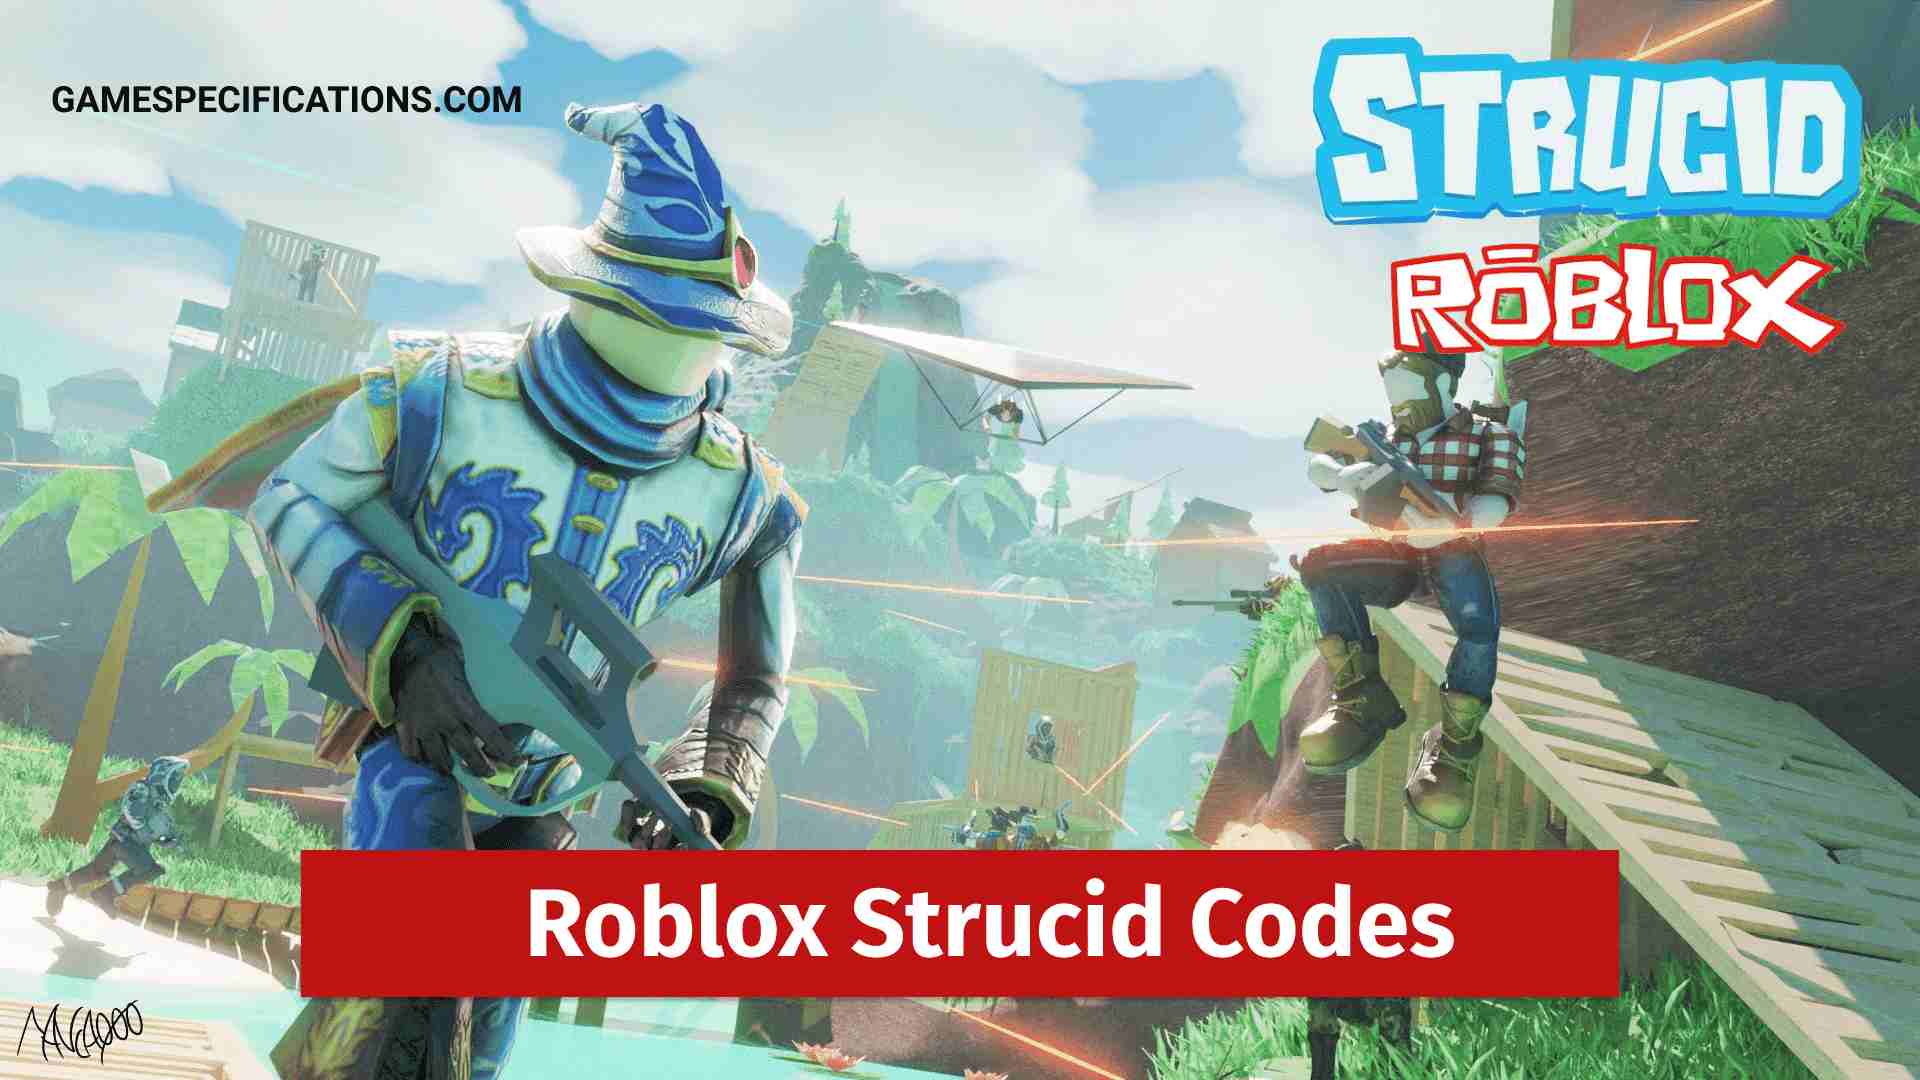 Roblox Strucid Codes For Free Coins May 2021 Game Specifications